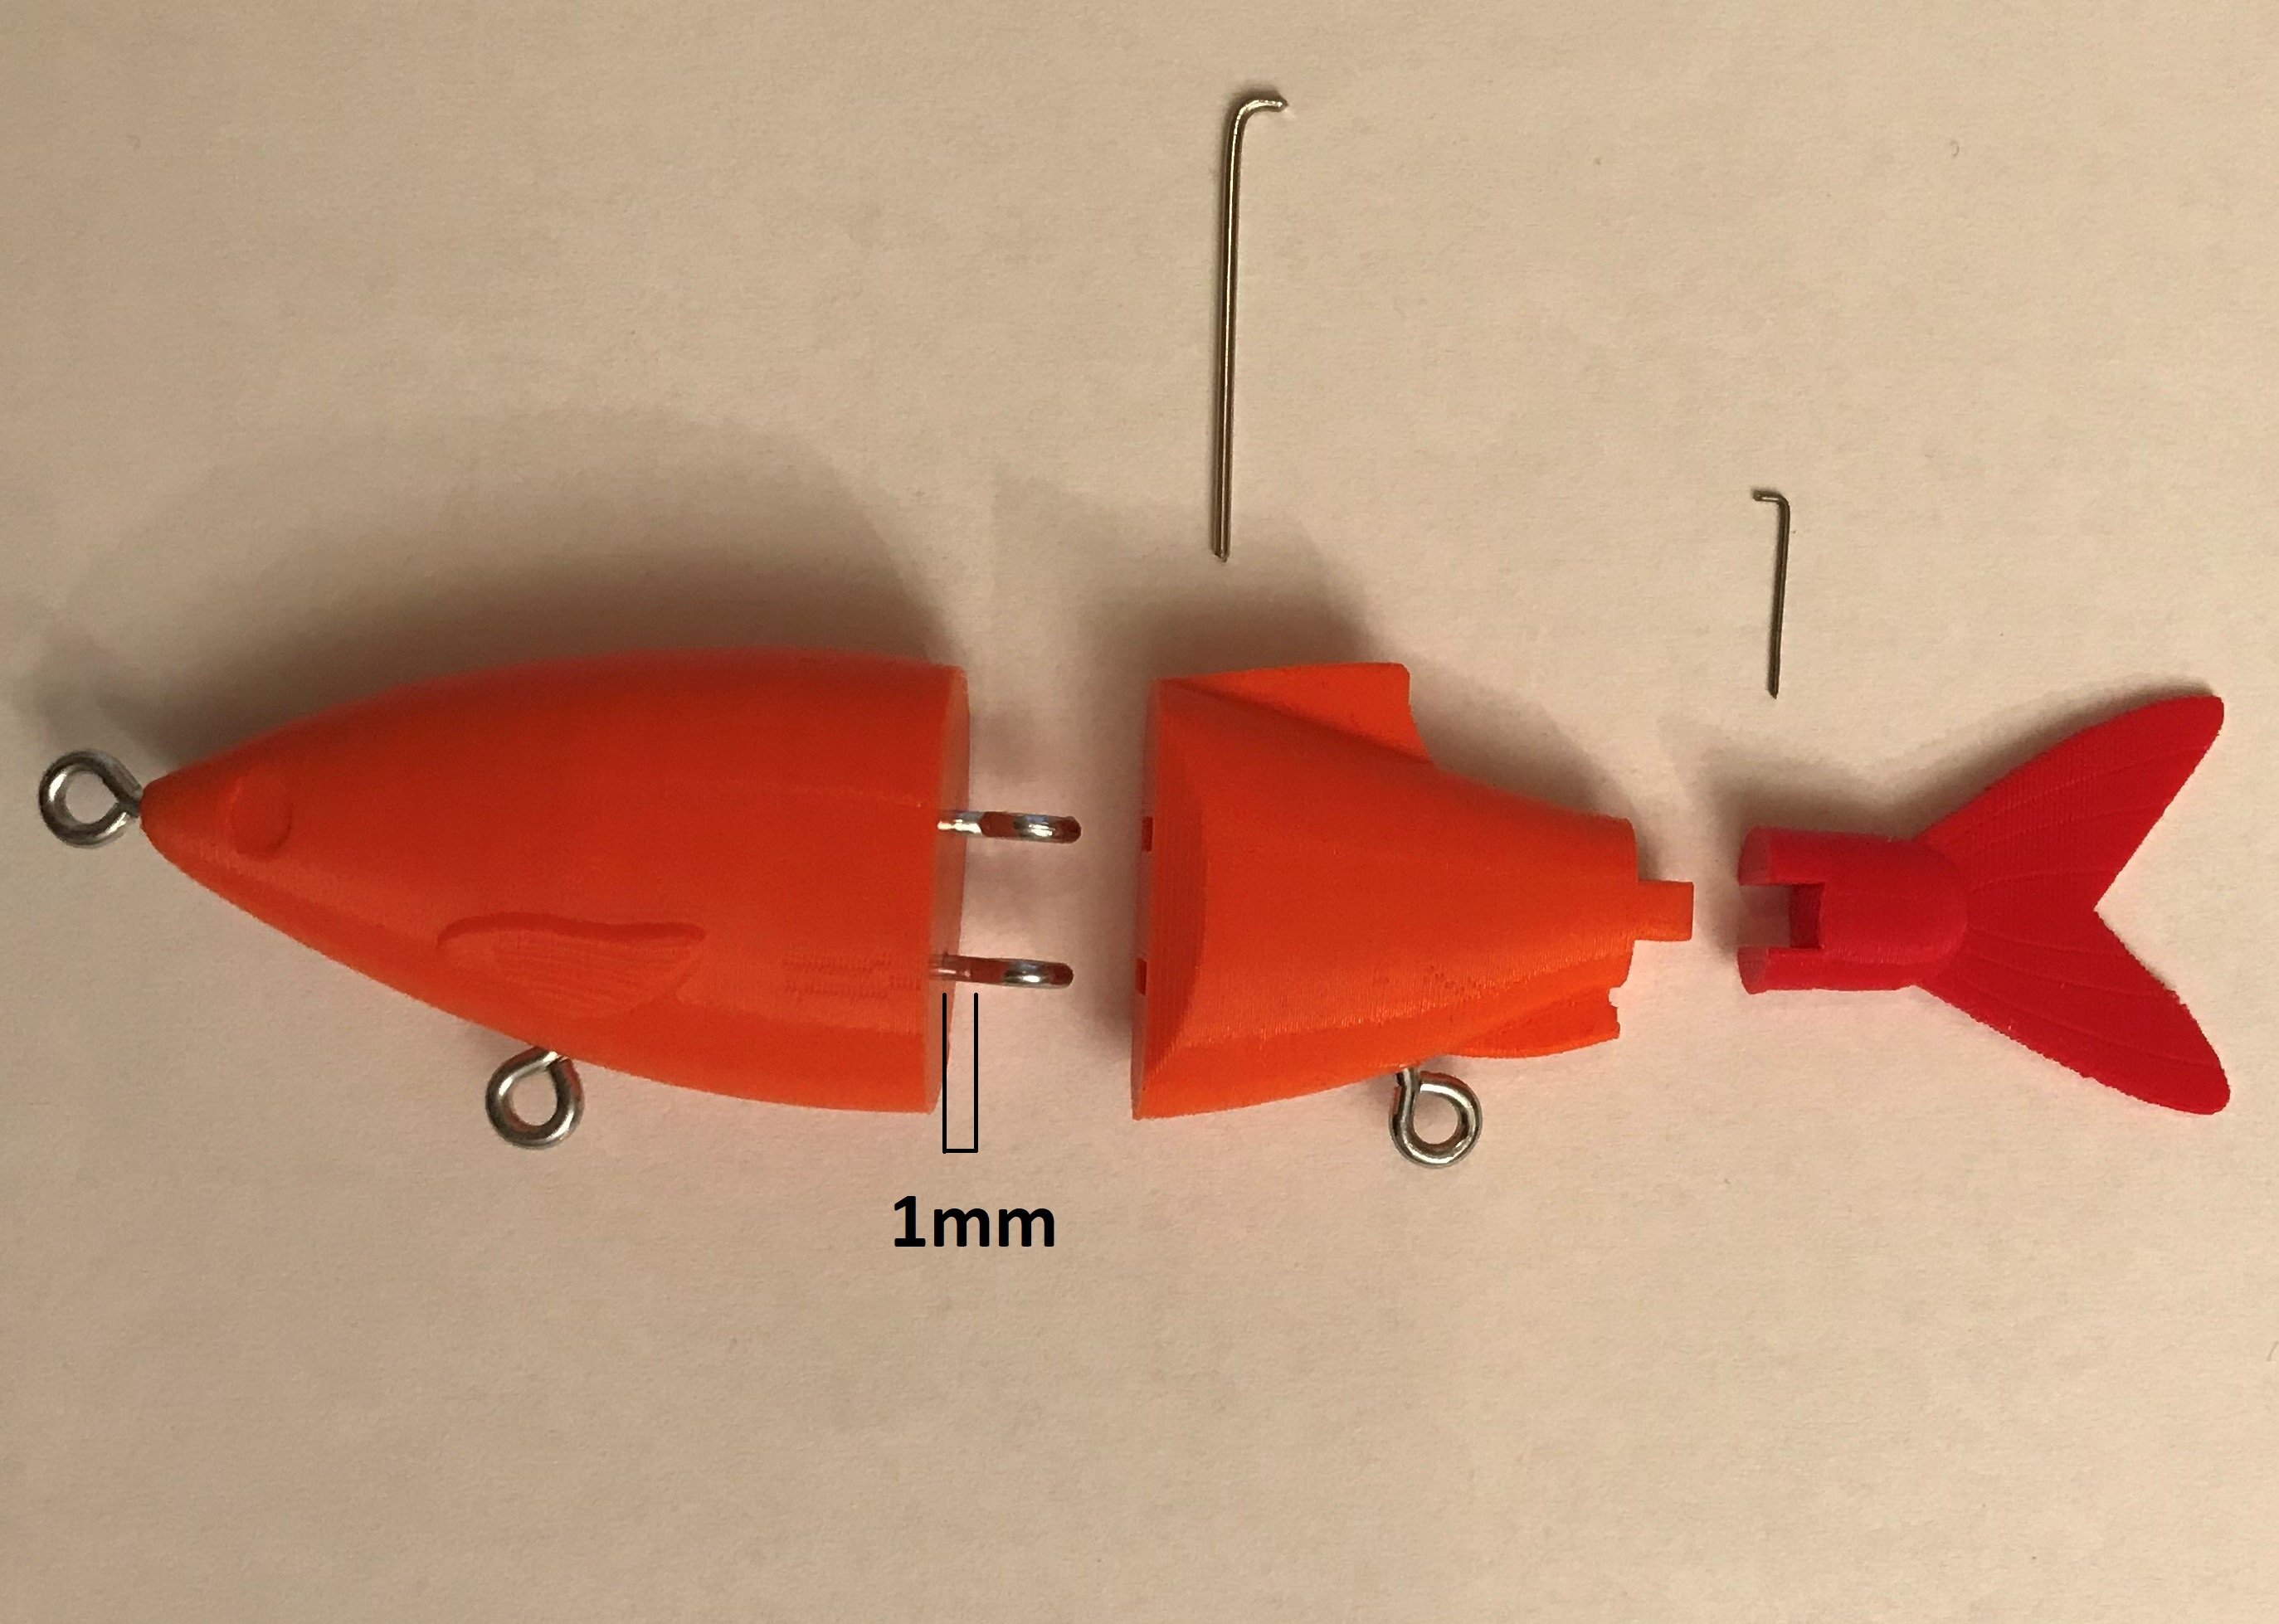 Swimbait fishing Lure 12.5cm (easy print and build) by Domi1988